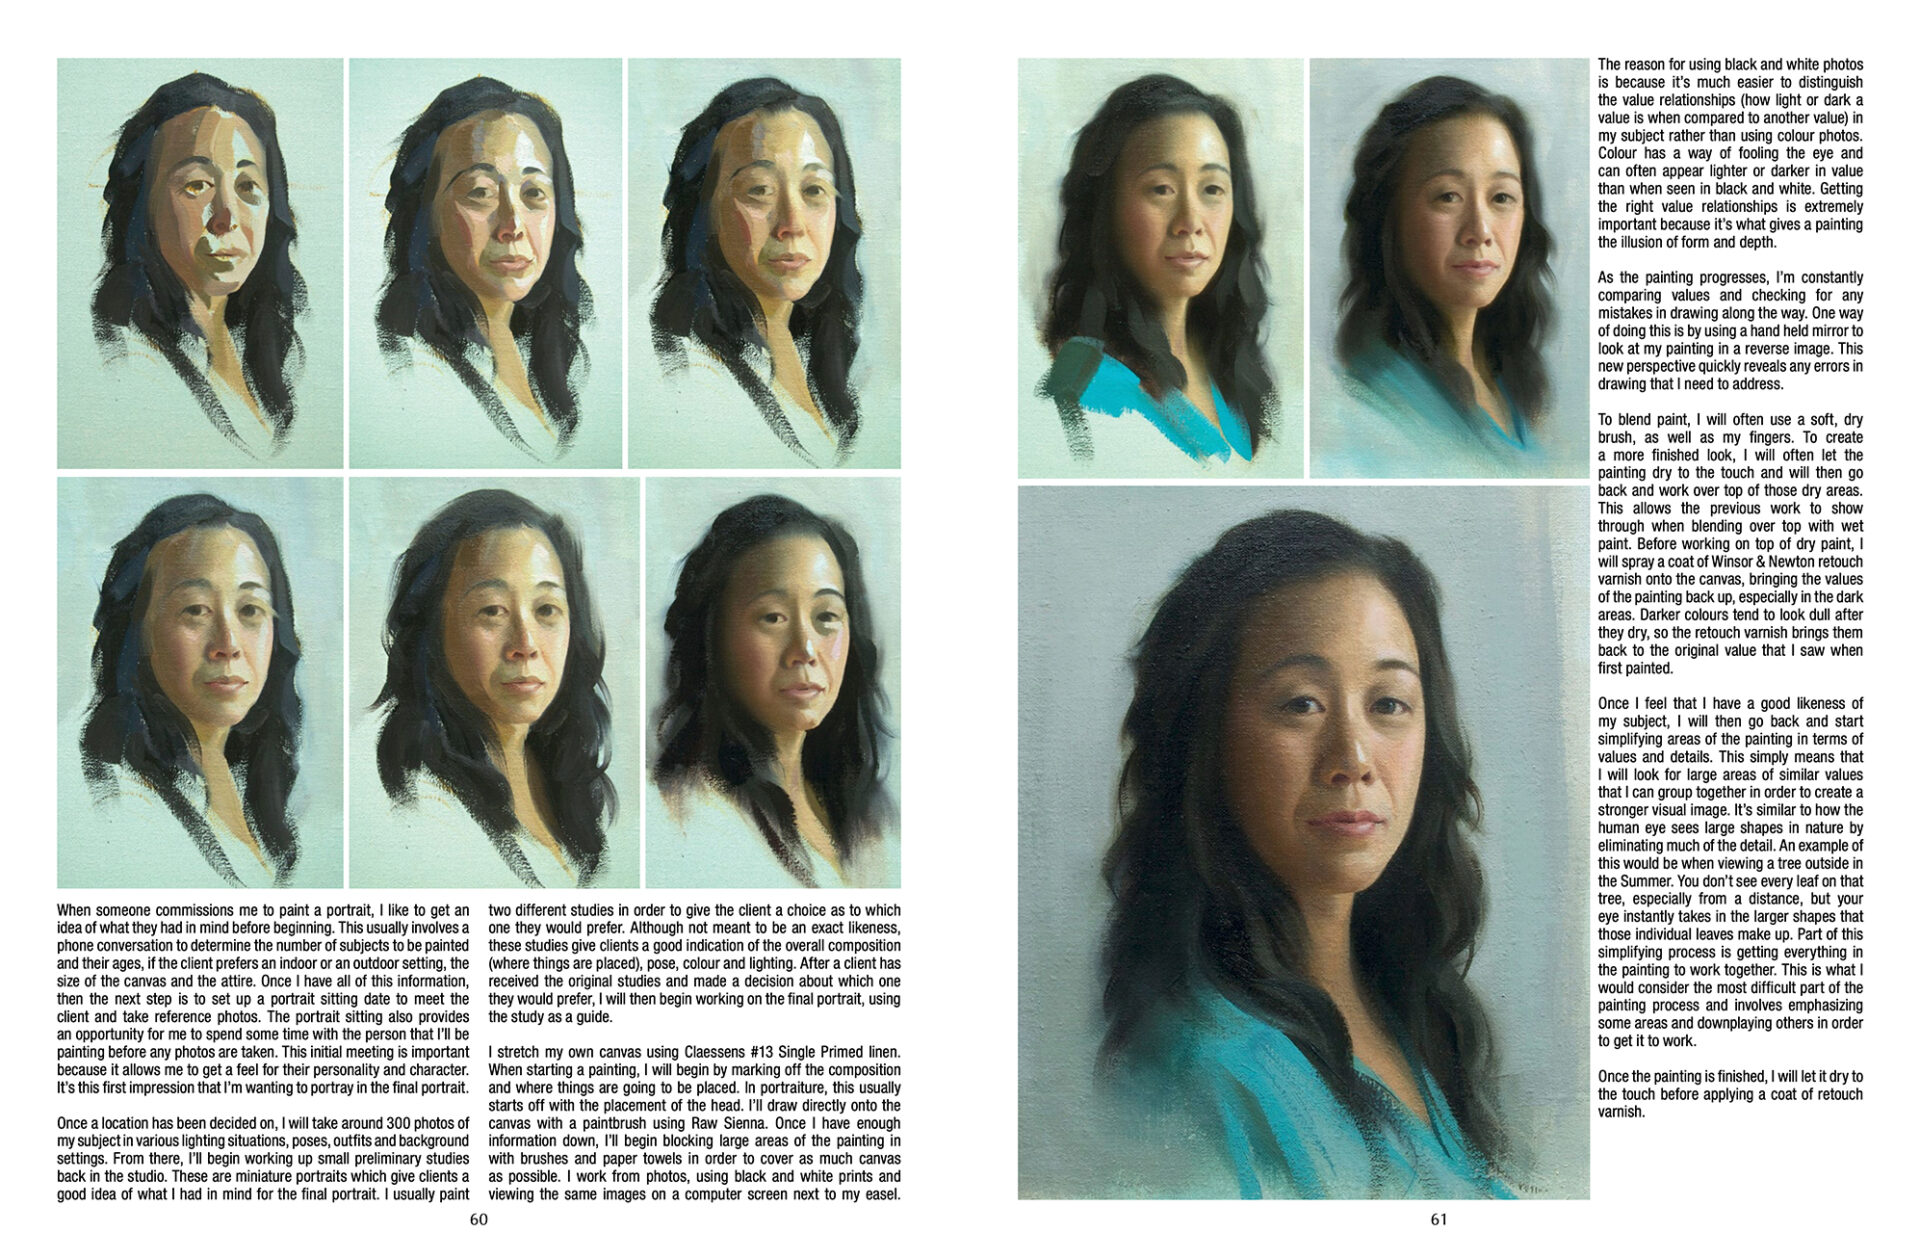 A series of photographs showing the face of a woman.